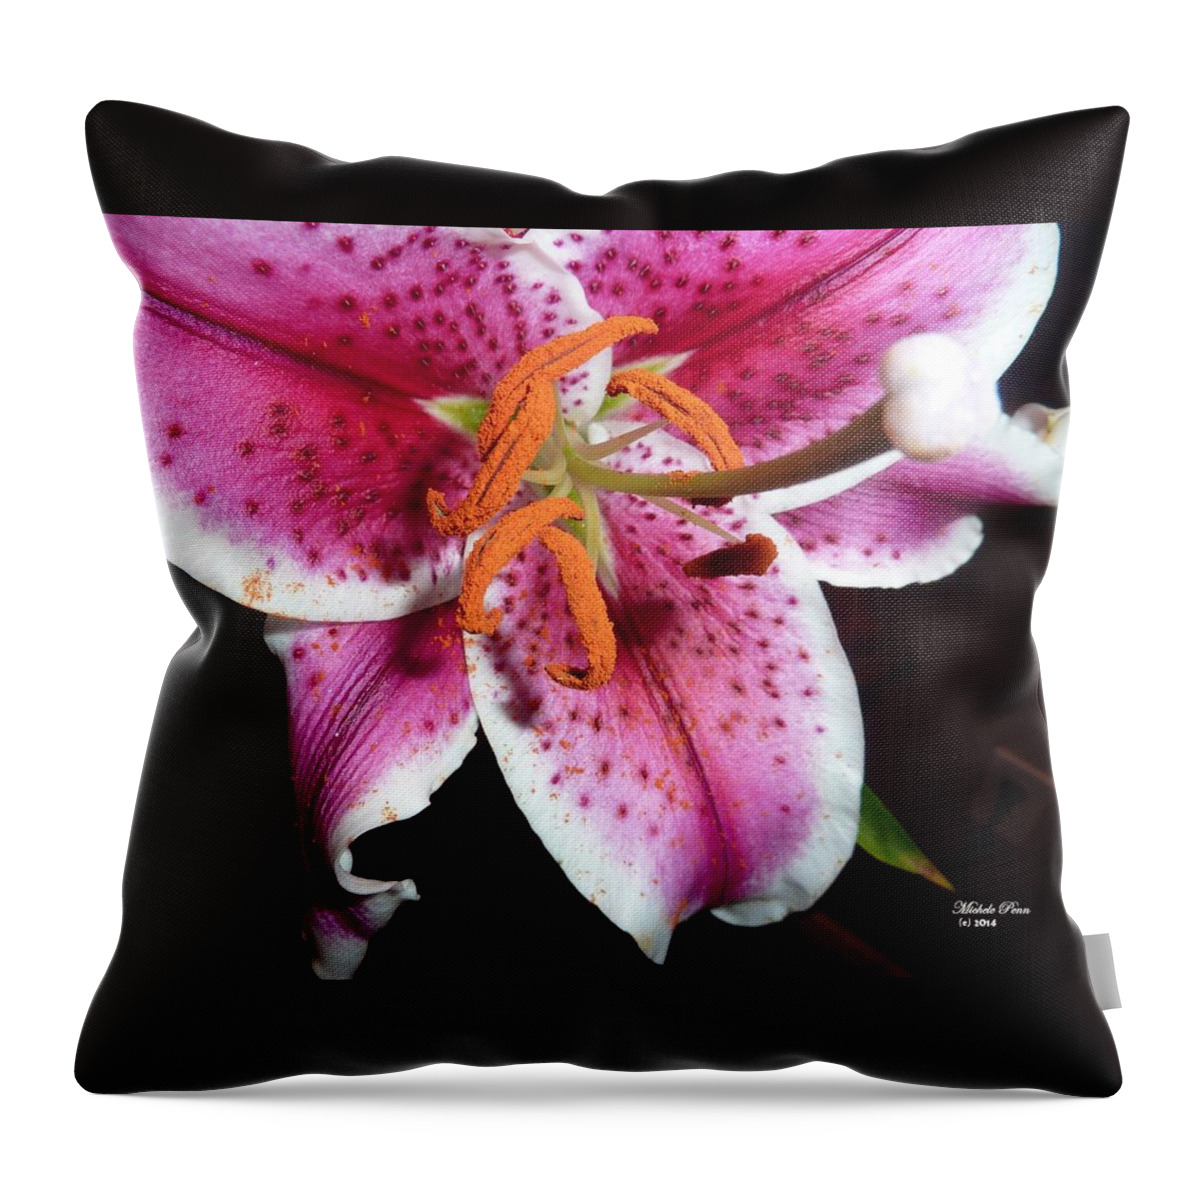 Flower Photograph Throw Pillow featuring the photograph Energized - Wild Orange by Michele Penn